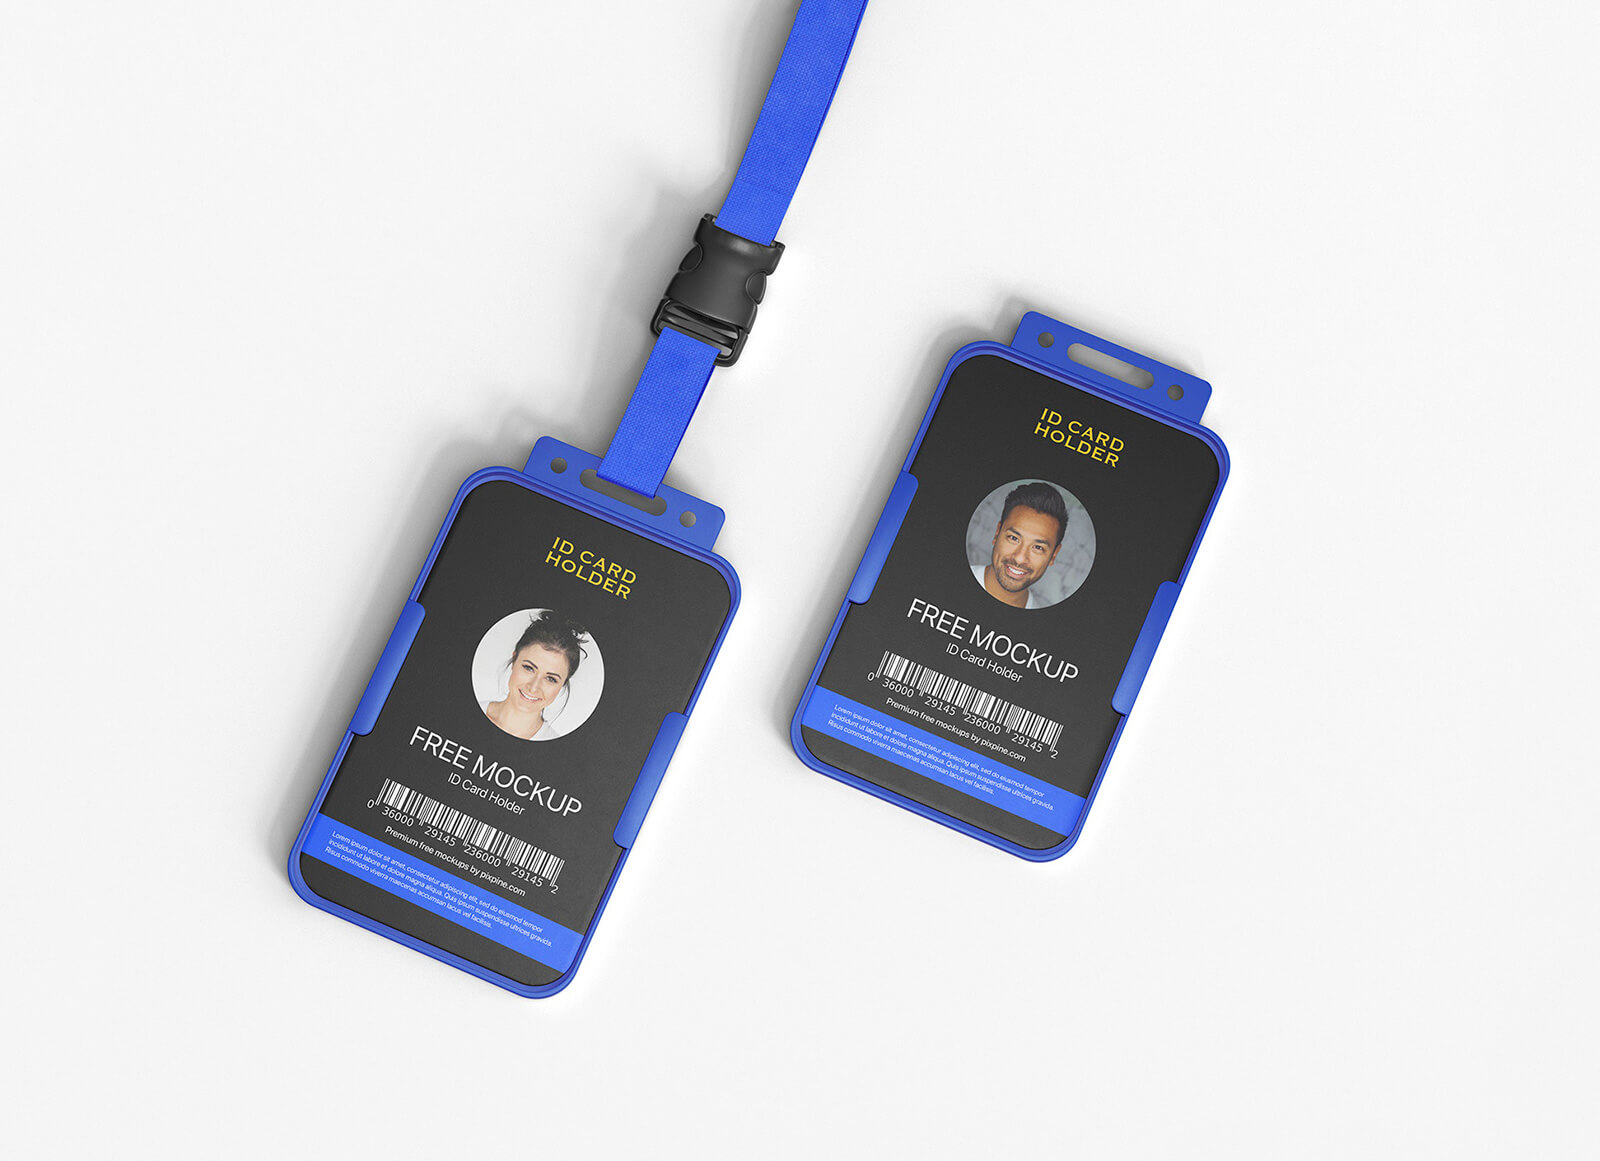 Free-Corporate-ID-Card-Holder-with-Lanyard-Mockup-PSD